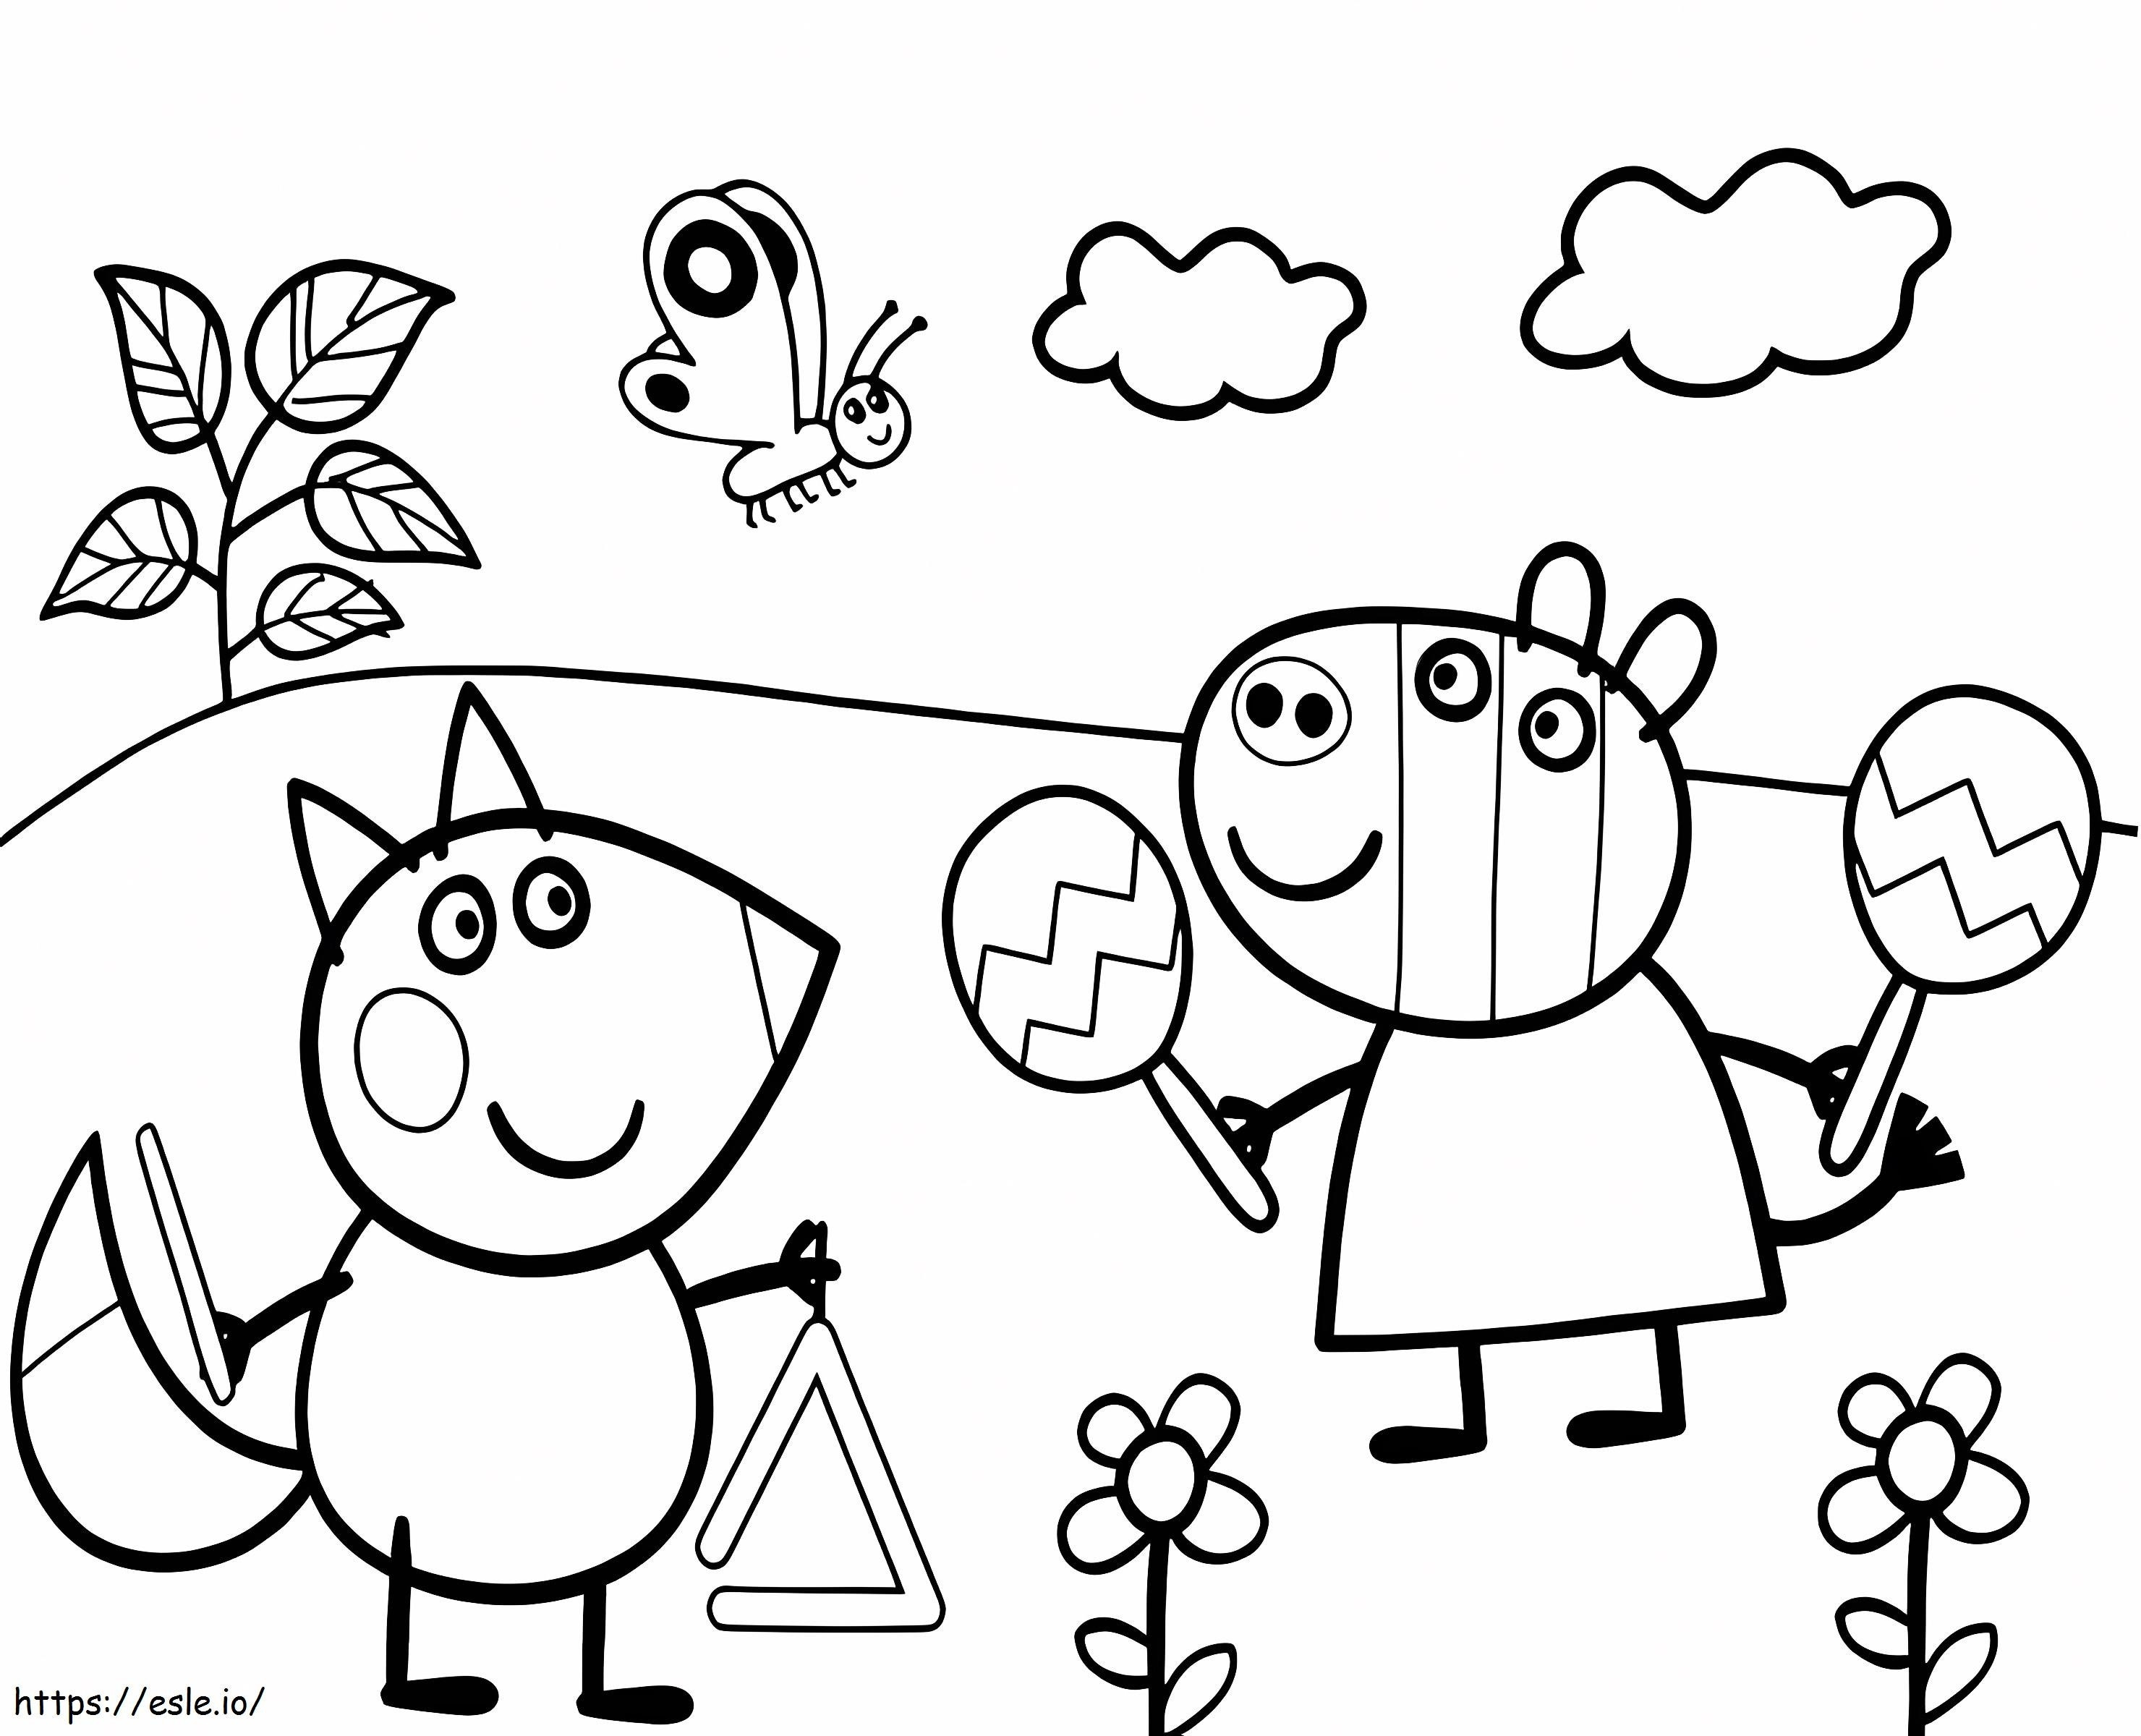 Suzy And Freddy coloring page